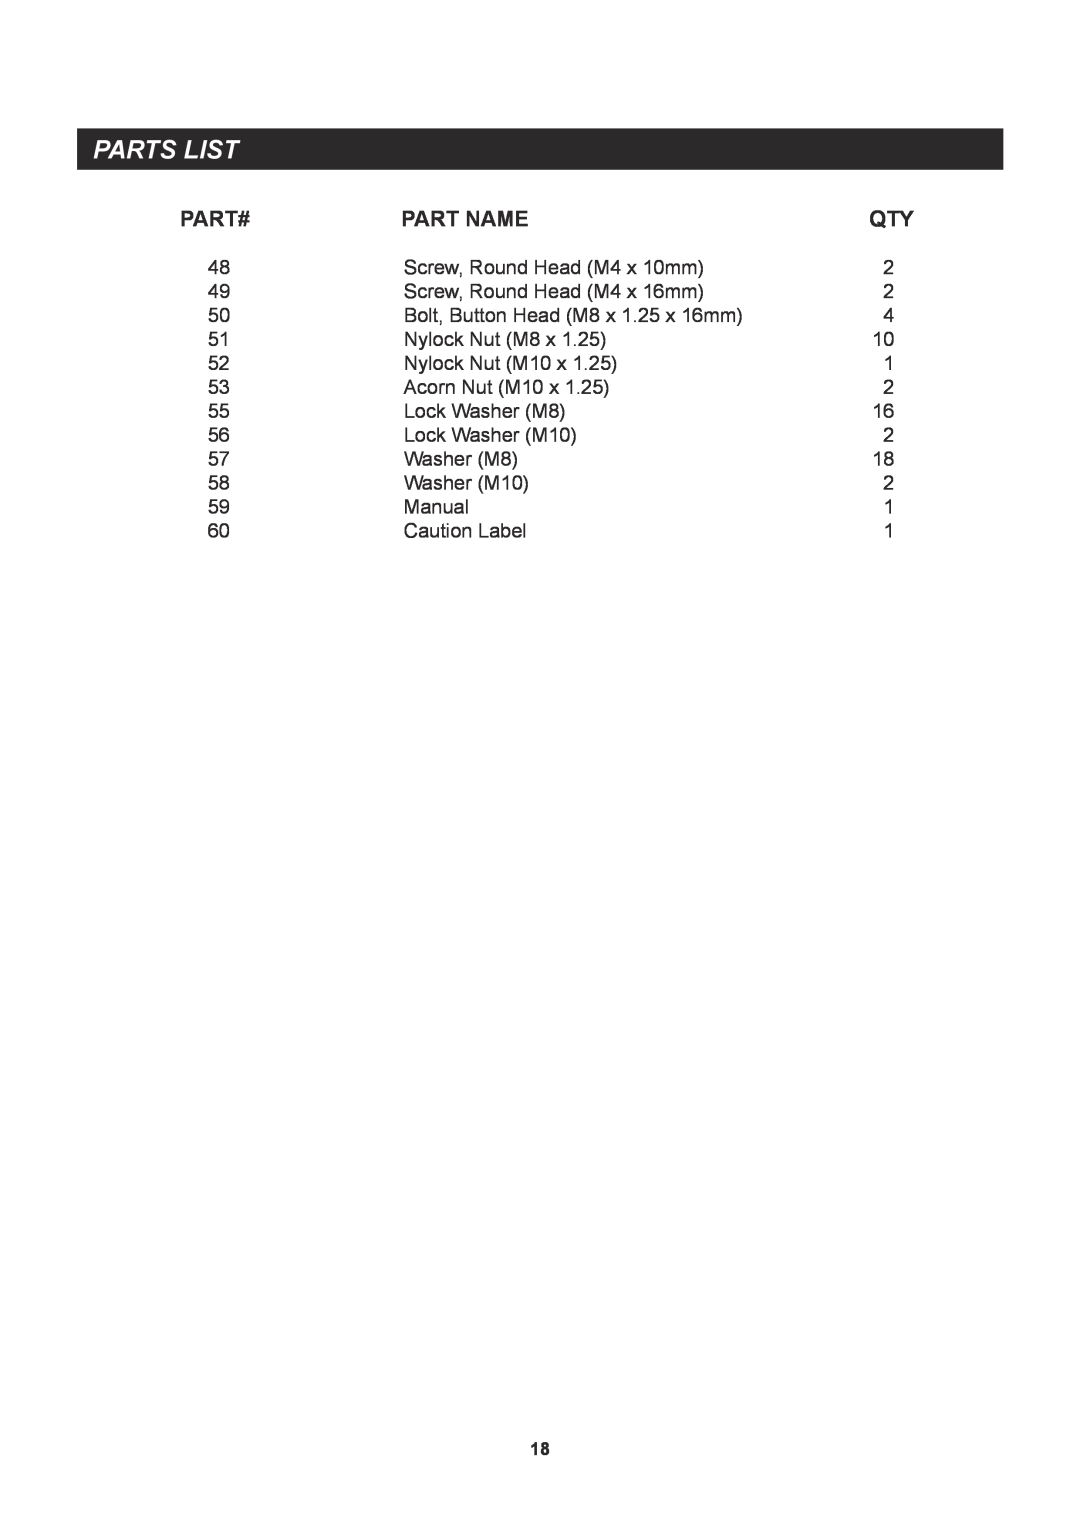 Sears 35-1215B owner manual Parts List, Part# 